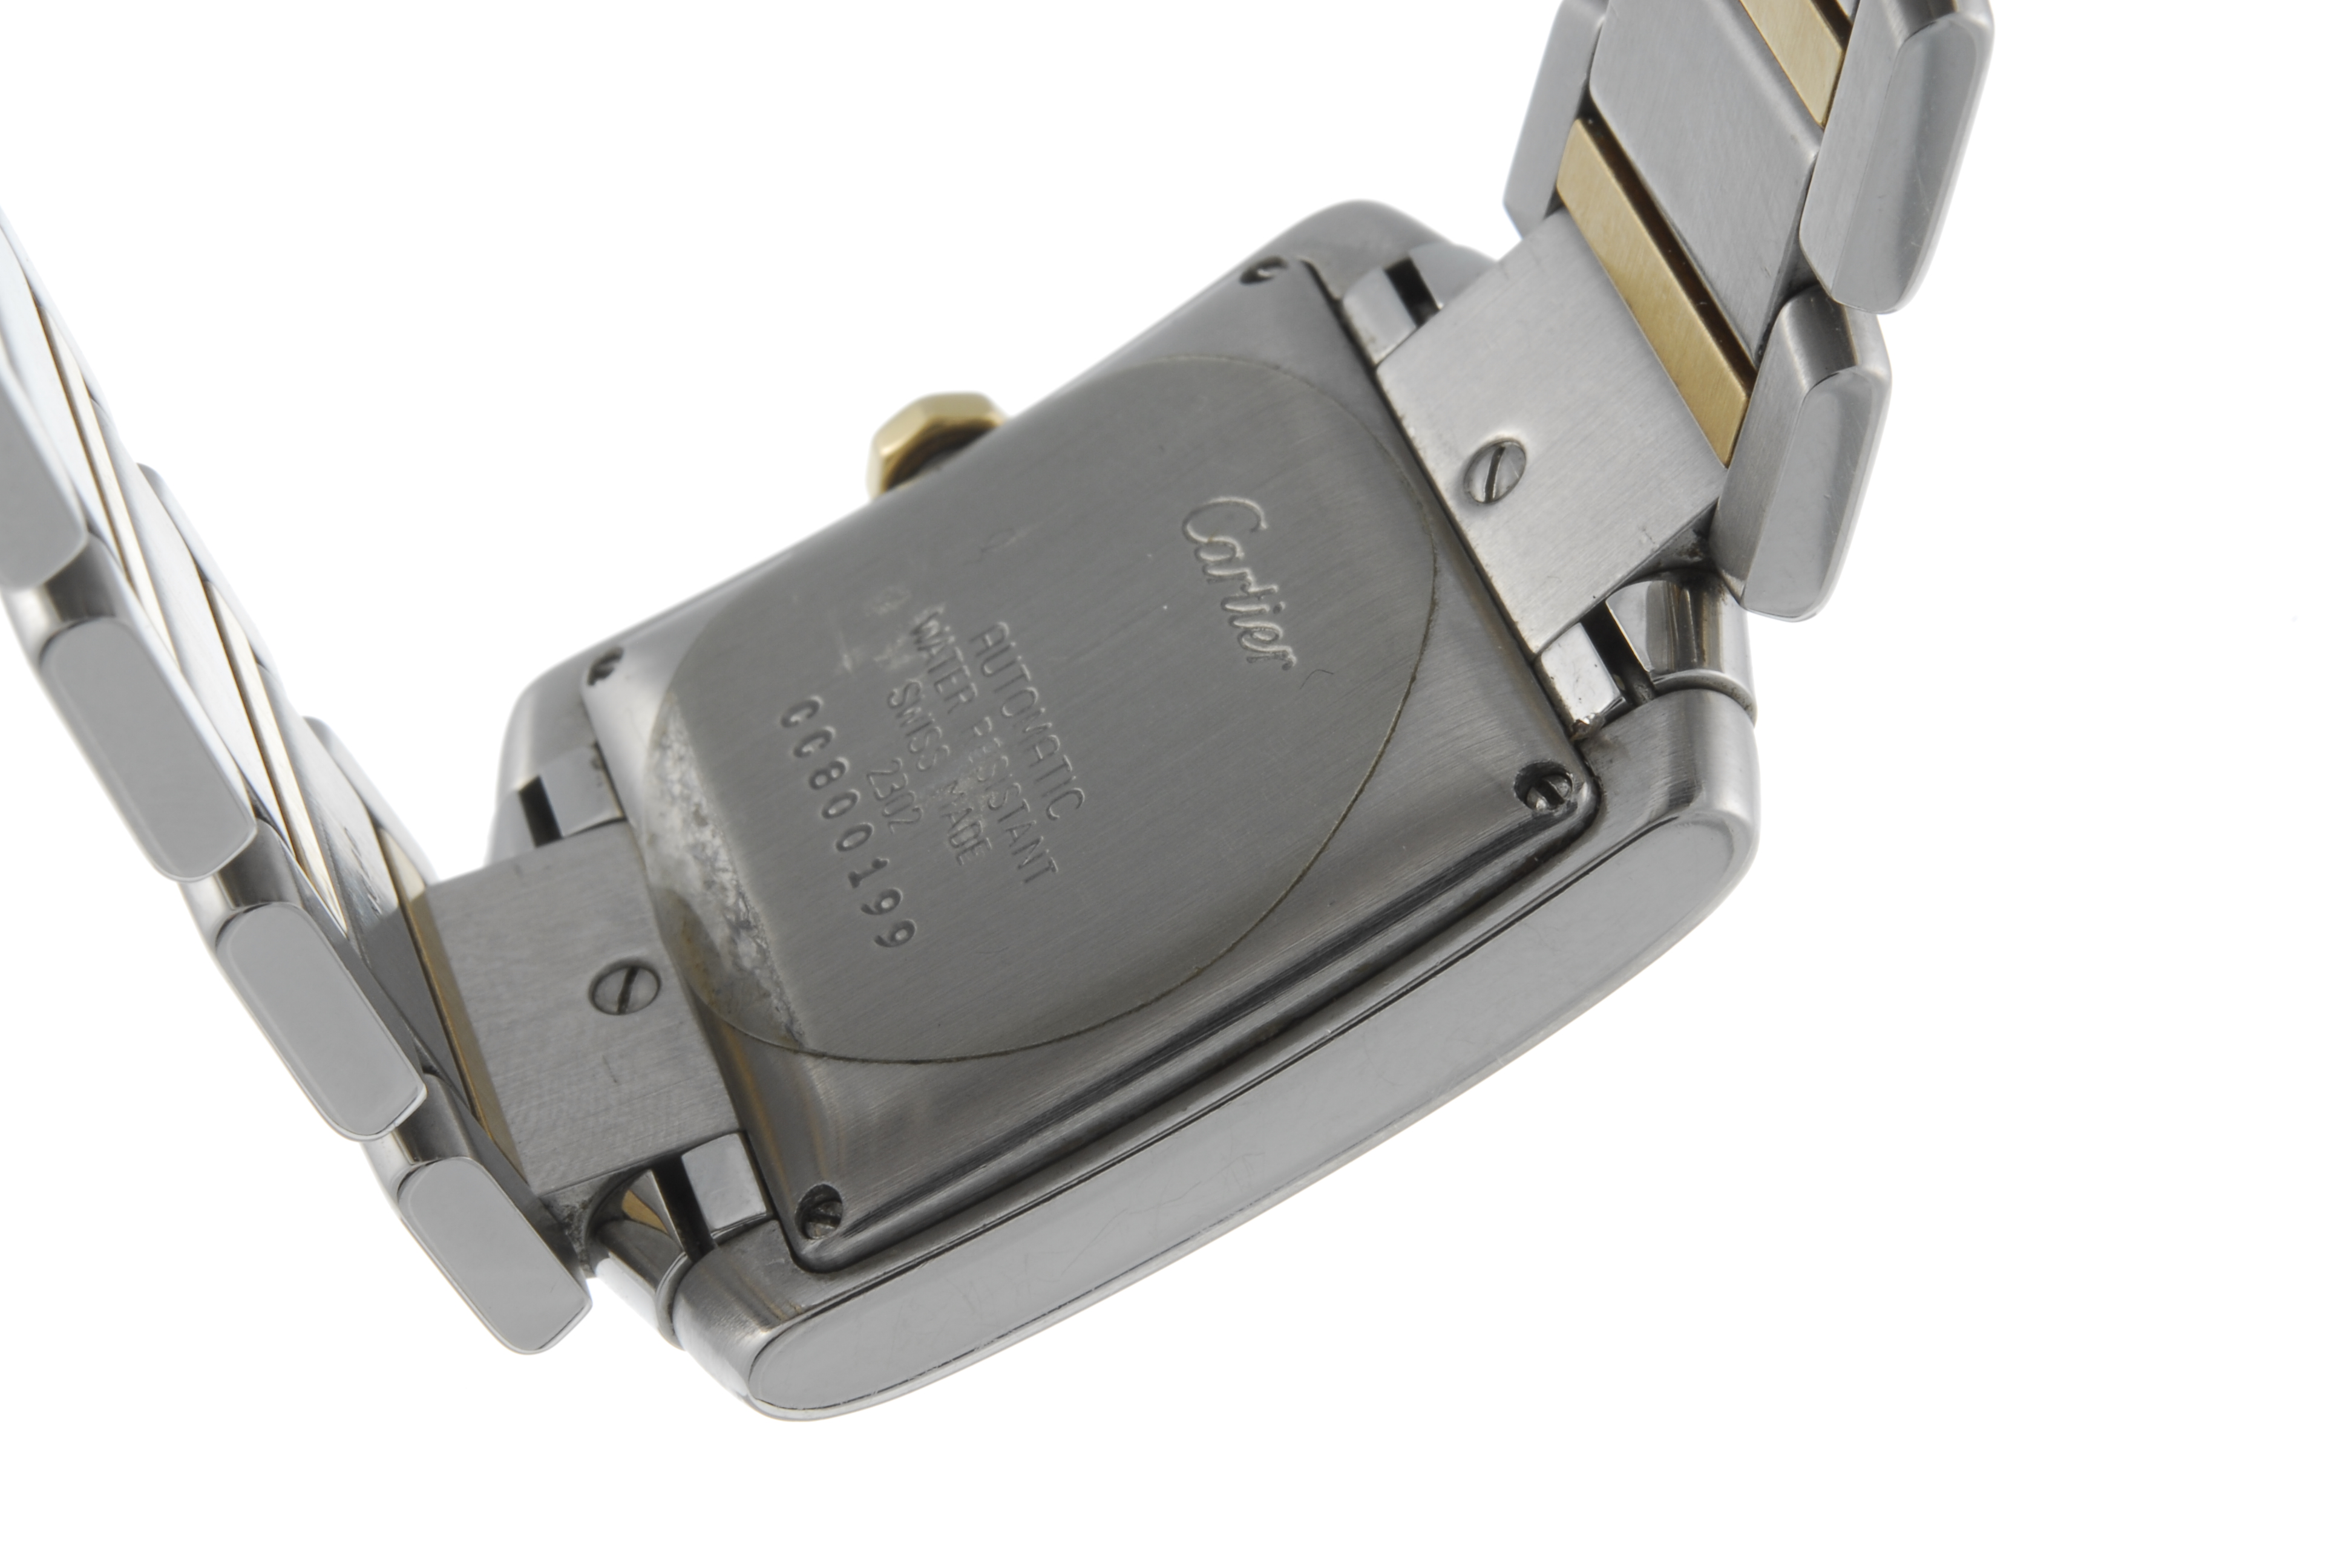 CARTIER - a Tank Francaise bracelet watch. Stainless steel case. Reference 2302, serial CC800199. - Image 2 of 4